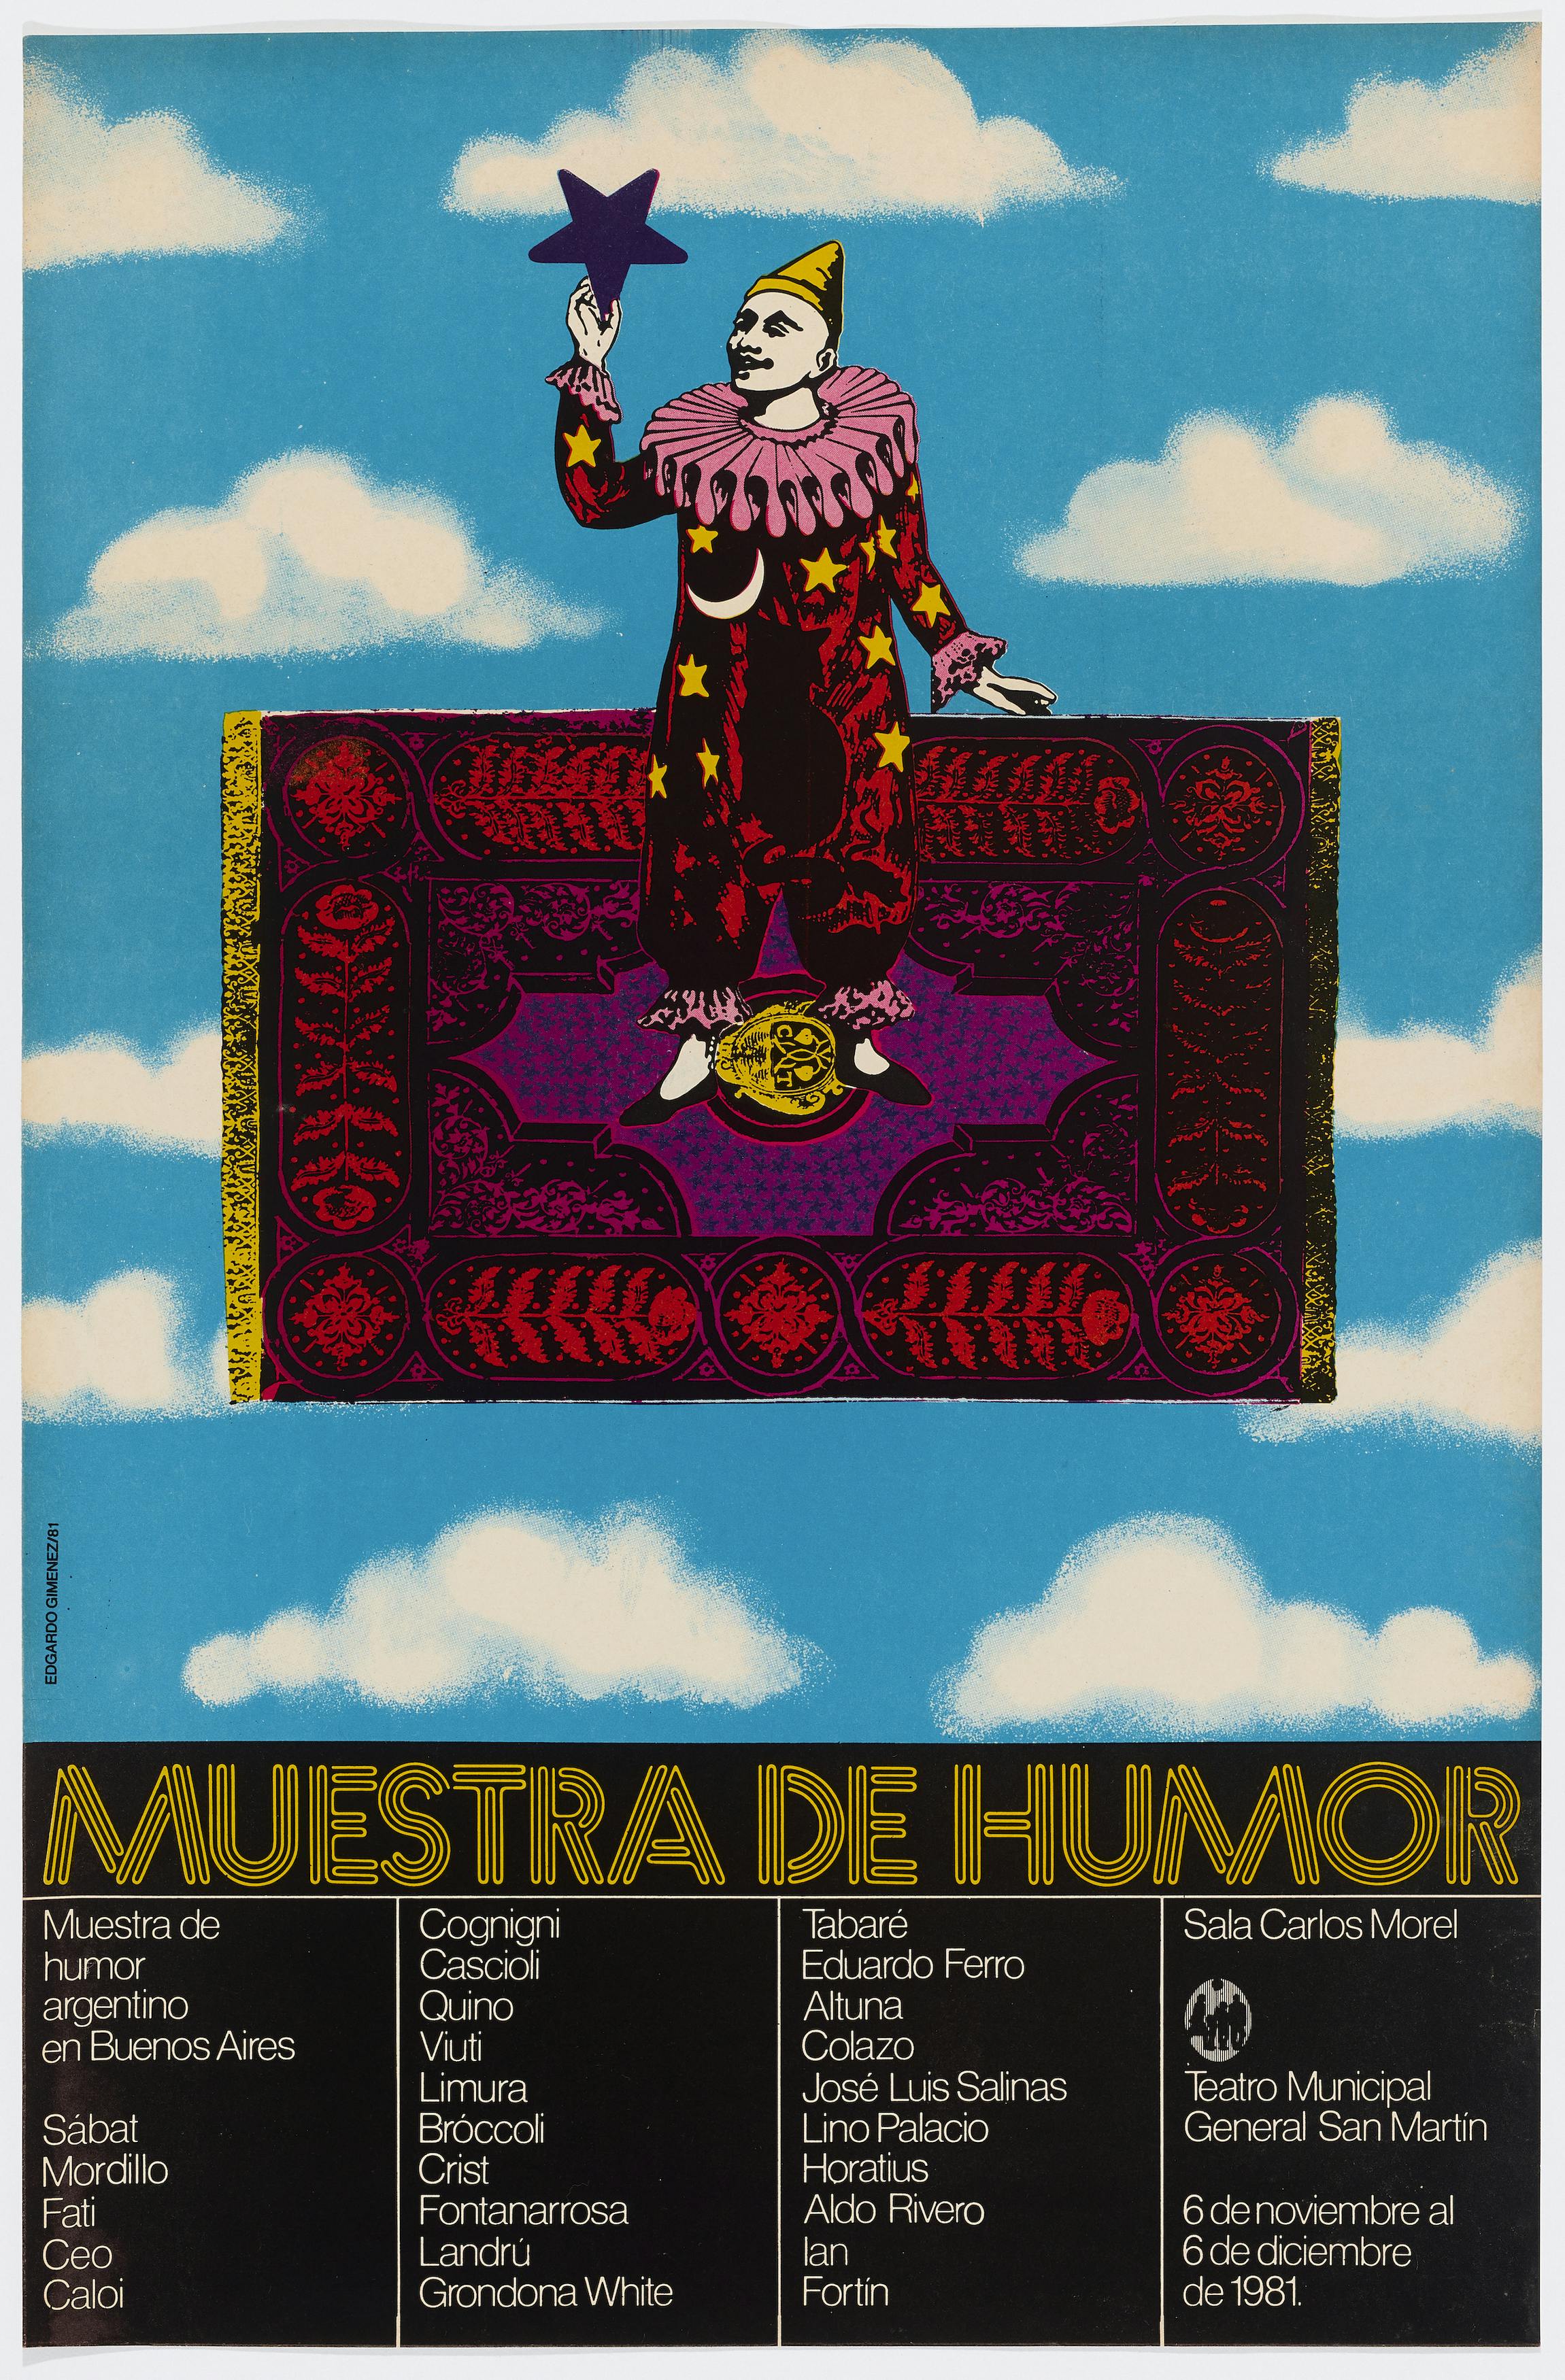 In the top portion of this poster, a clown drawn with thin black lines stands on a flying carpet against a backdrop of blue skies and white clouds, holding a purple five-pointed star upside-down by one point. The clown is white with a yellow cap and a red costume, which has a bright pink starched ruff and lace cuffs, as well as a white moon and yellow stars strewn across the body. At the center of the clown’s lower torso is the silhouette of a black cat. The flying carpet is arranged in corresponding colors: yellow centerpiece and tassels with red-and-black edges in a complex, flowery pattern. The lower quarter of the poster reads “MUESTRA DE HUMOR,” with text in four columns with the full title of the exhibition, the list of participants, and, in the last column, the location and date.